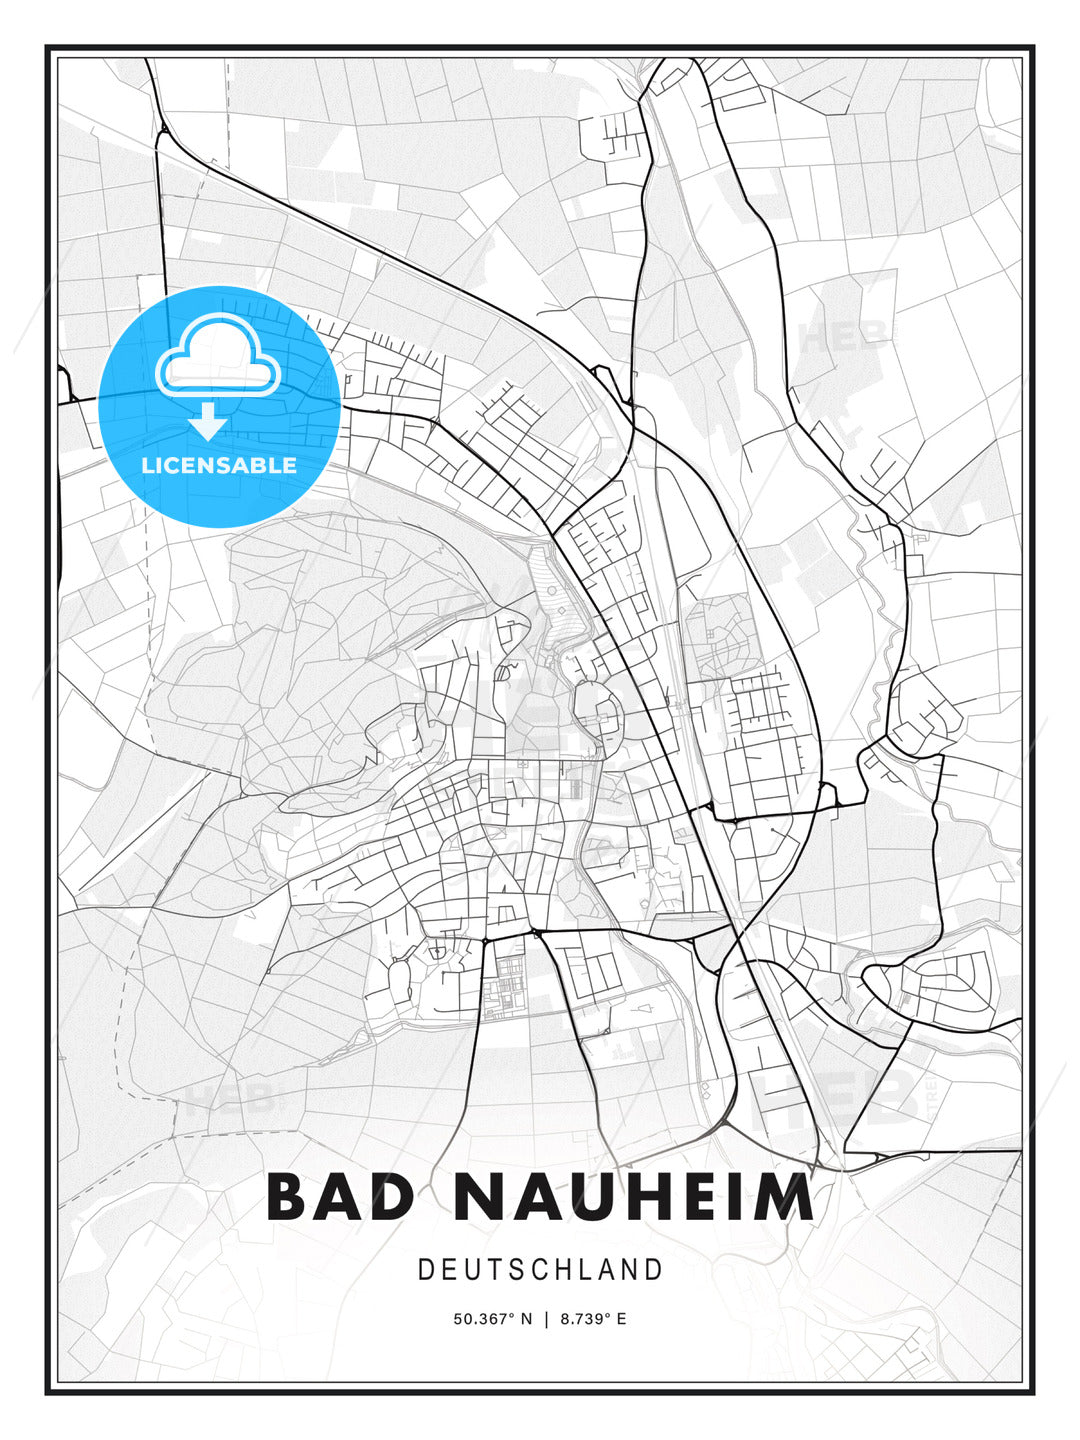 Bad Nauheim, Germany, Modern Print Template in Various Formats - HEBSTREITS Sketches